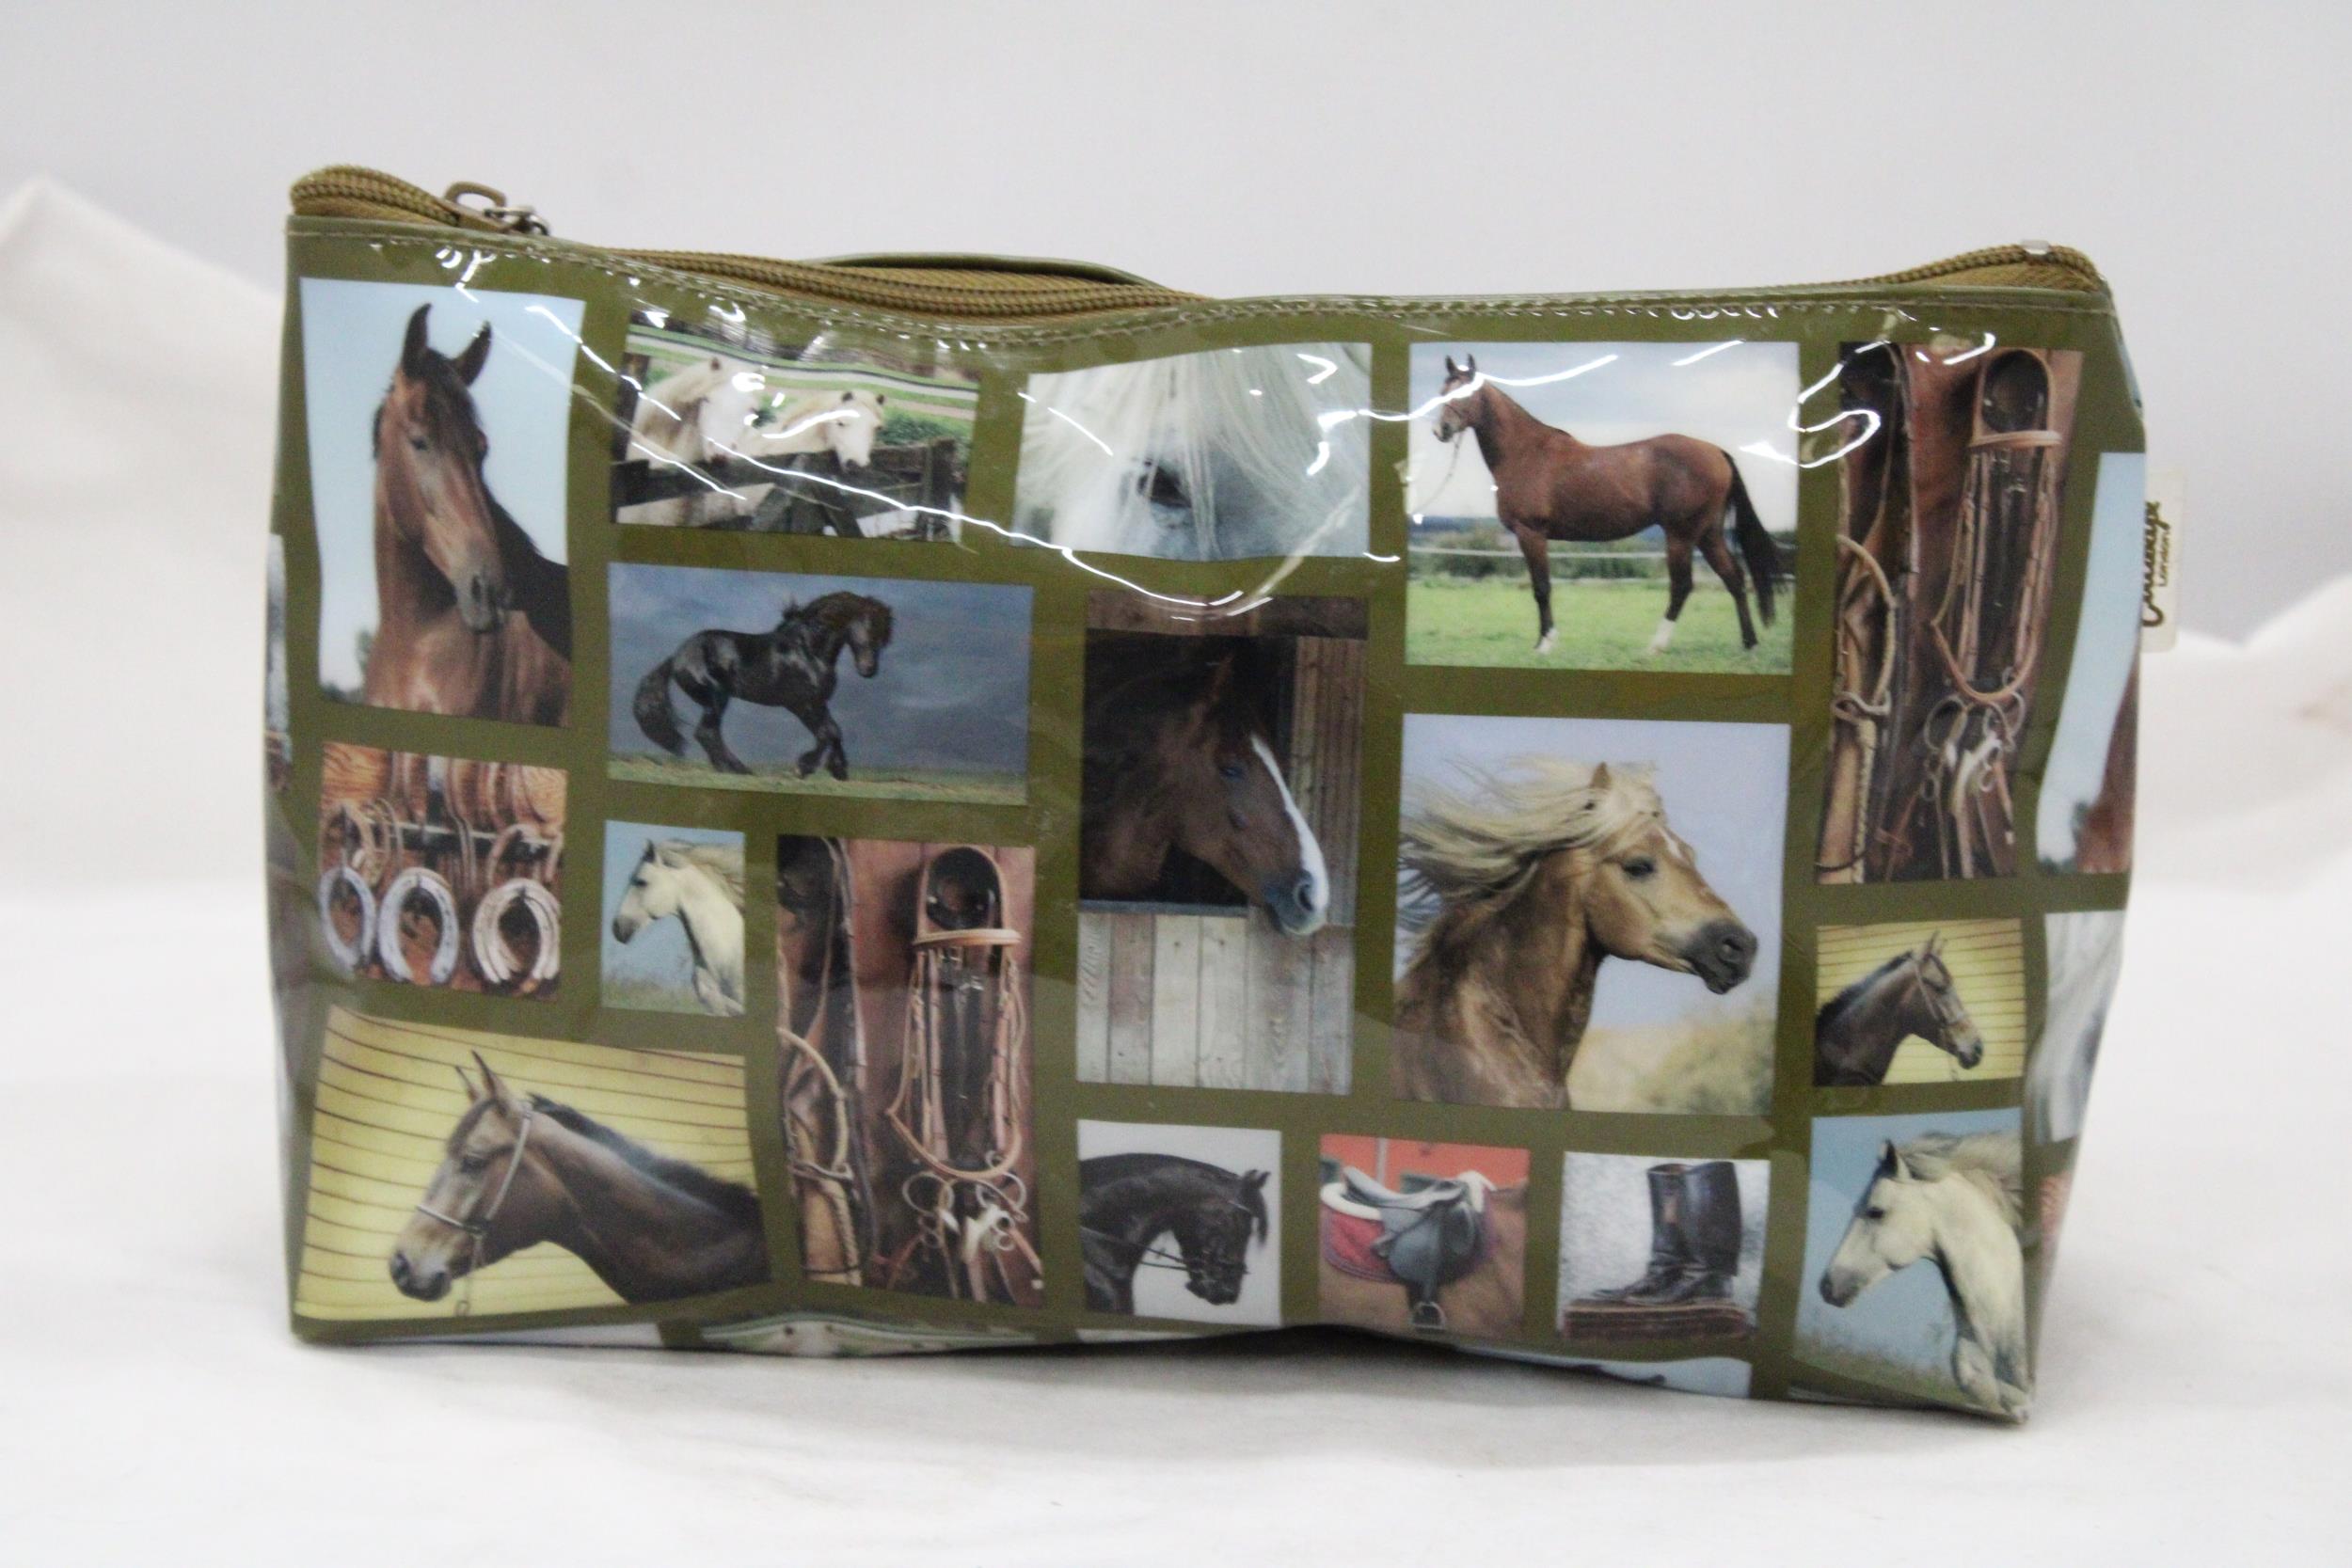 A DESIGNER "HORSEY" BAG WITH A MATCHING PURSE BY CATSEYE OF LONDON - Image 4 of 4